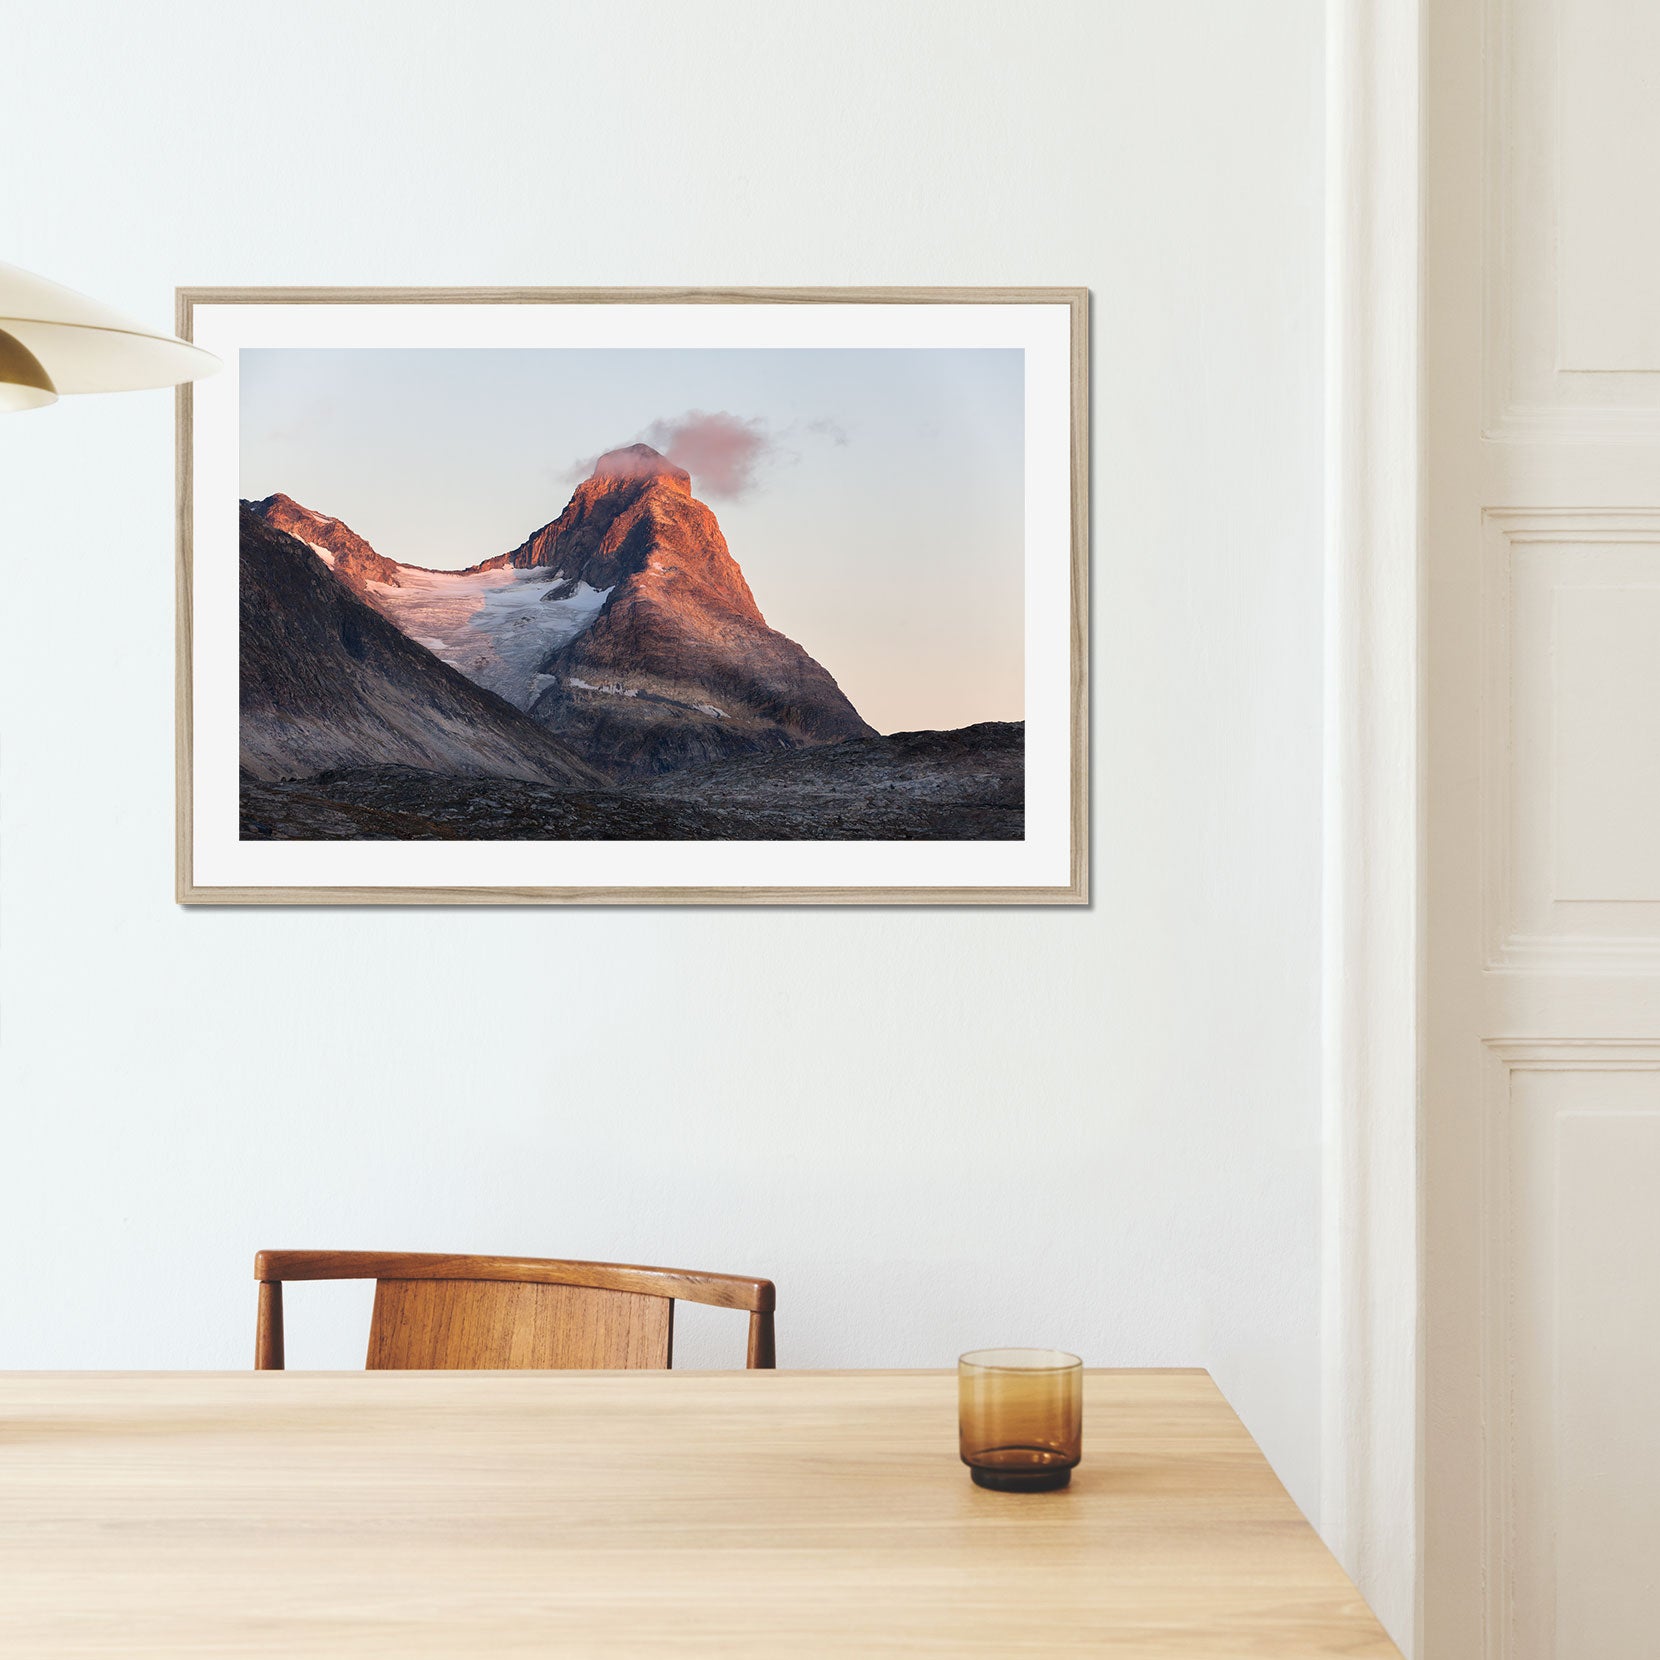 A framed print of a mountain peak at sunset